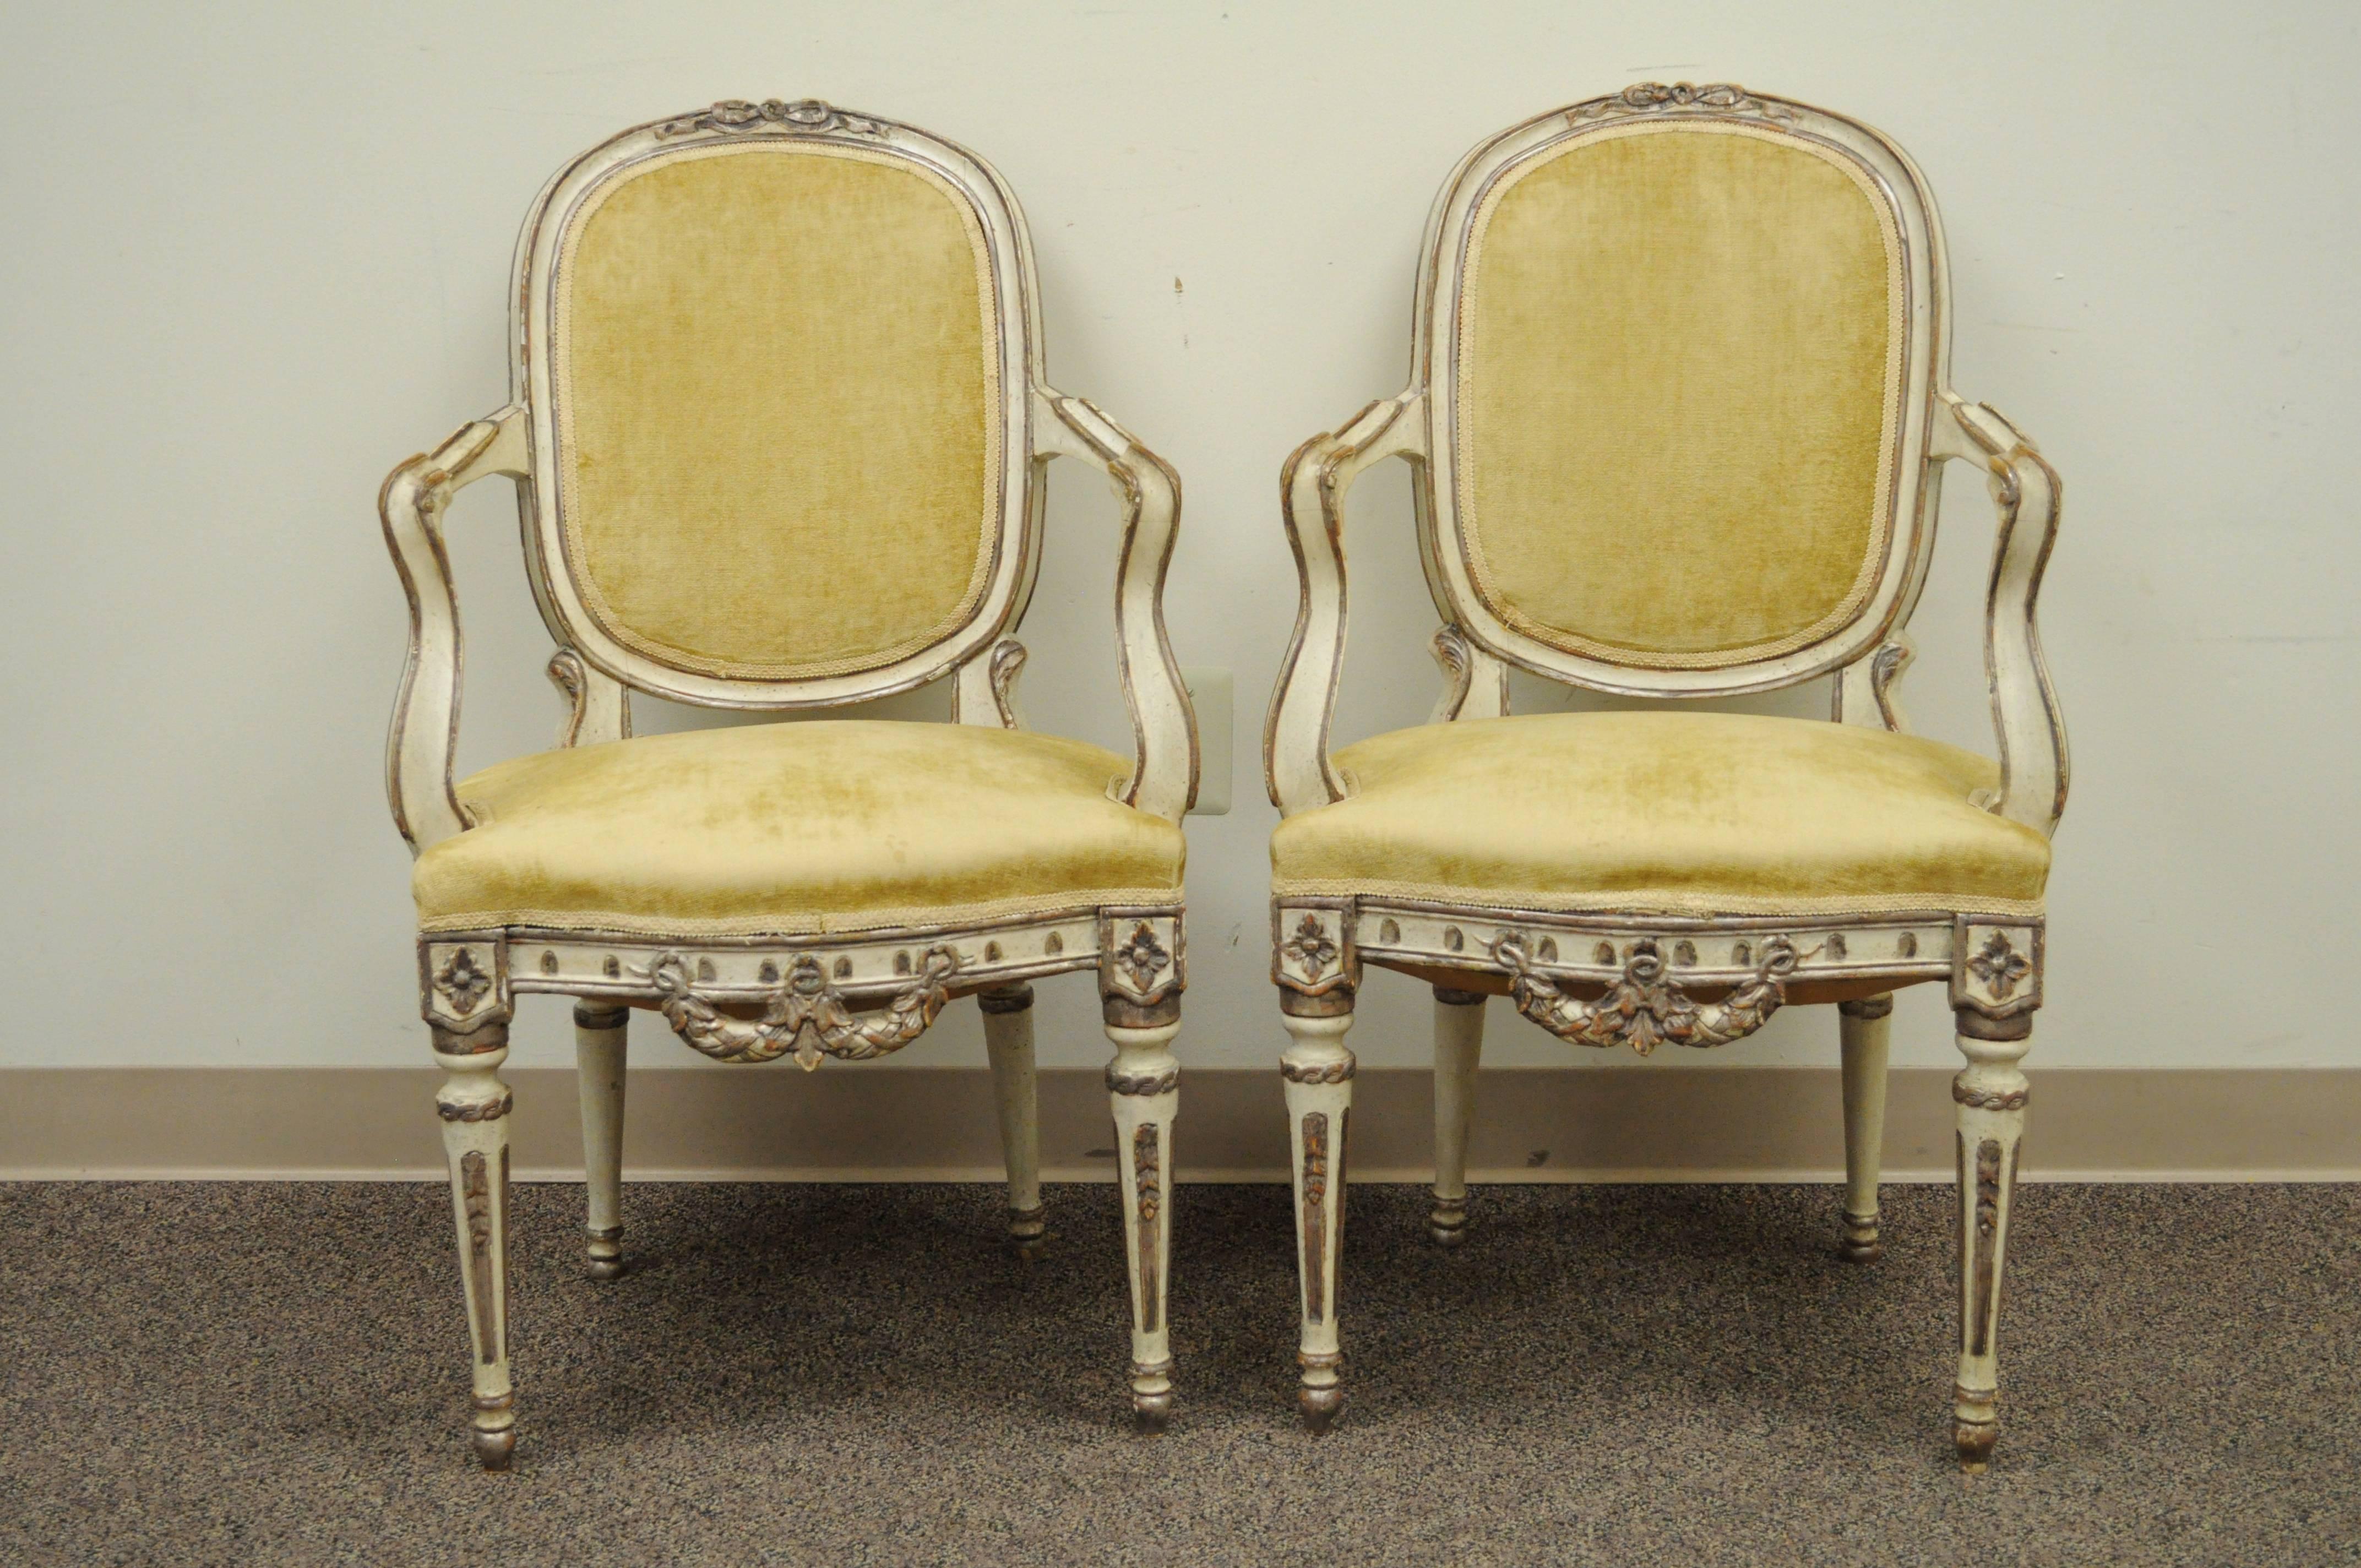 Remarkable pair of Italian hand-carved Fauteuils, circa late 1800s in the French Louis XVI taste. The pair features shapely scrolling arms, medallion backs, reeded and tapered legs, bow and drape carved pediment and lower rail, and a beautiful